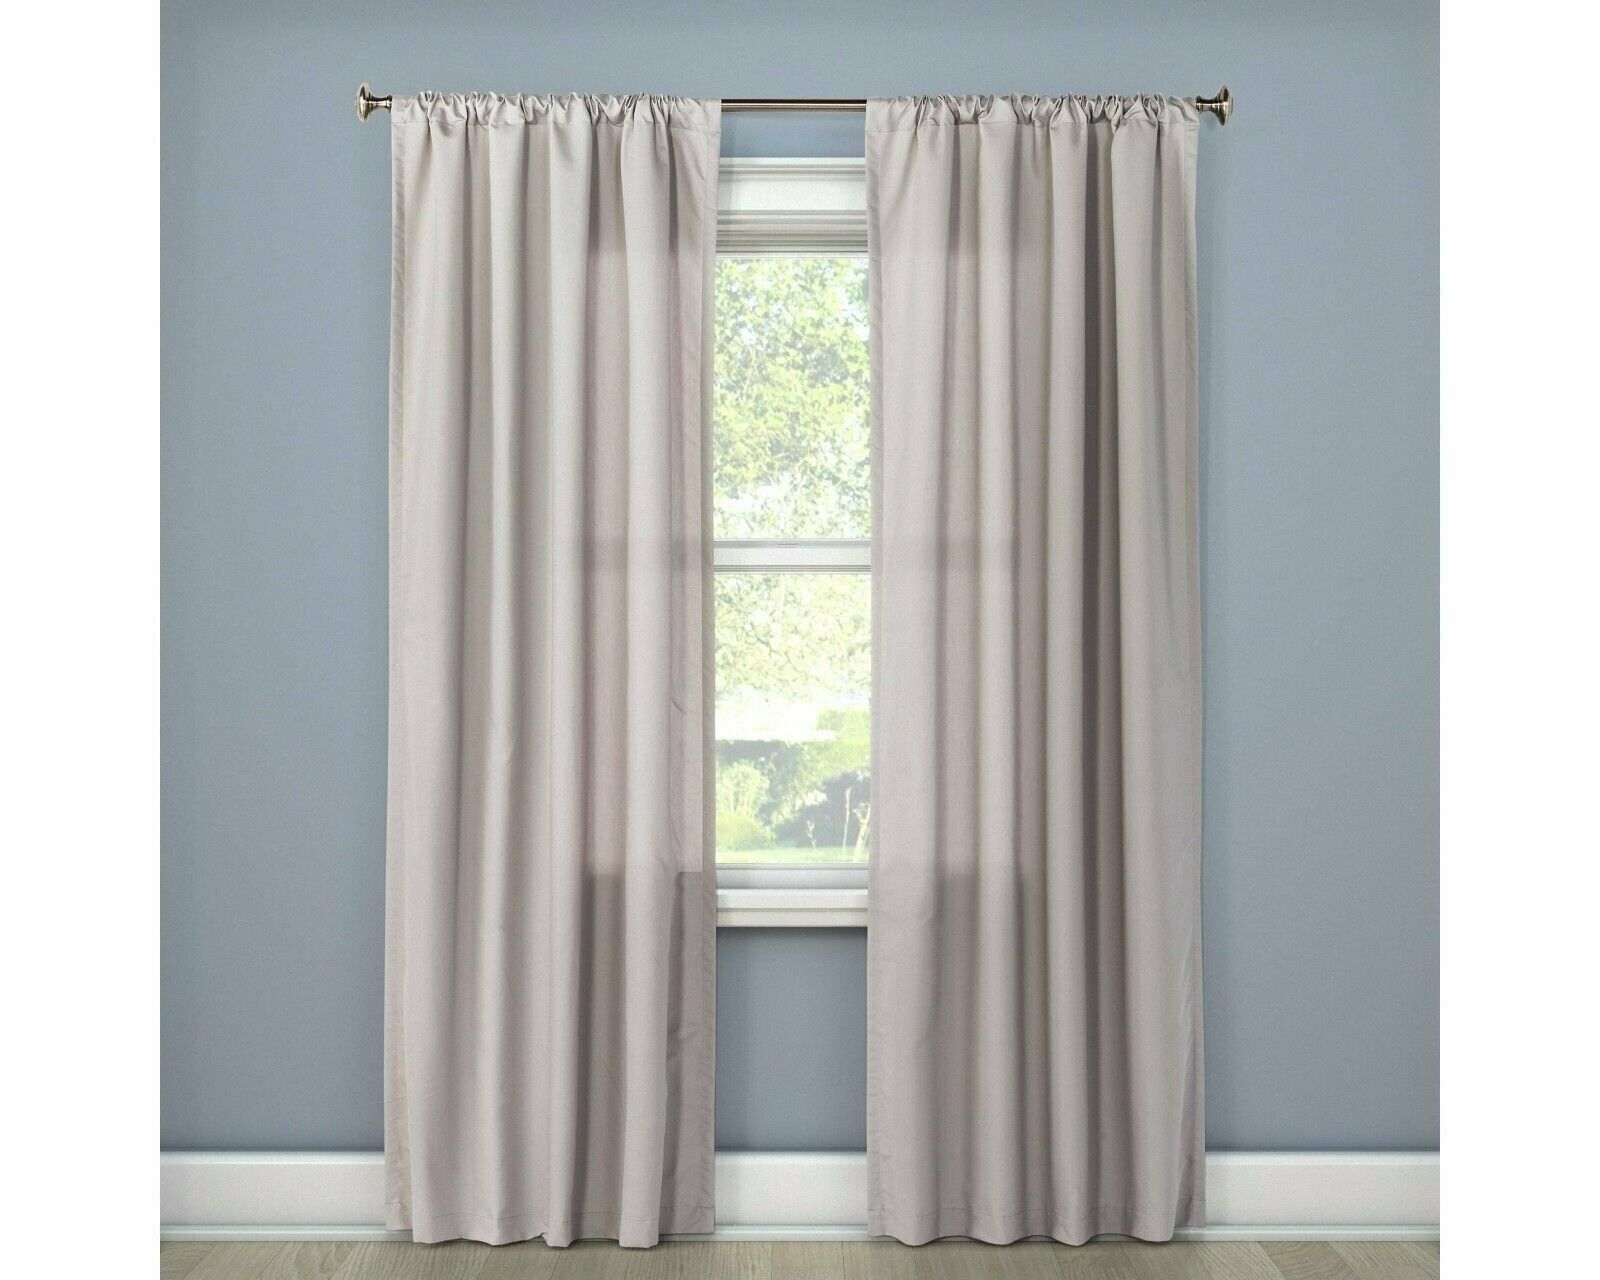 Primary image for Room Essentials Twill Curtain Panel, Gray, 42" W x 63" L (New Open Package)